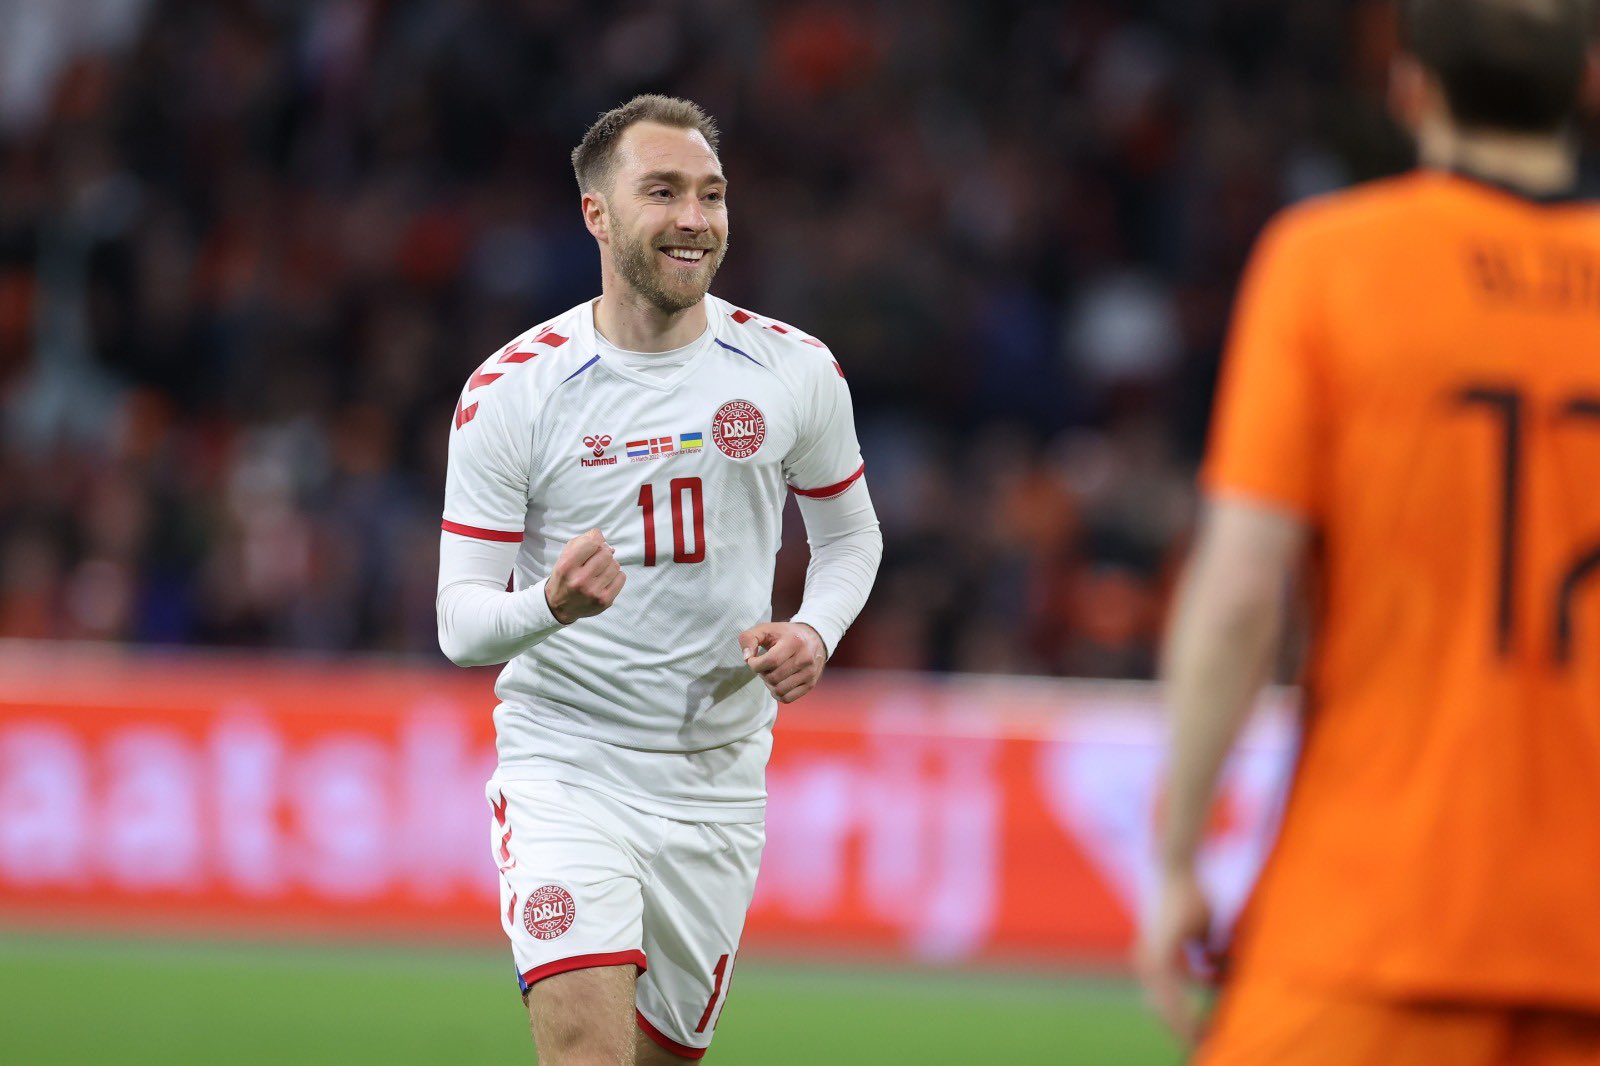 Its been a tough year but nice to be playing football again, reveals Christian Eriksen